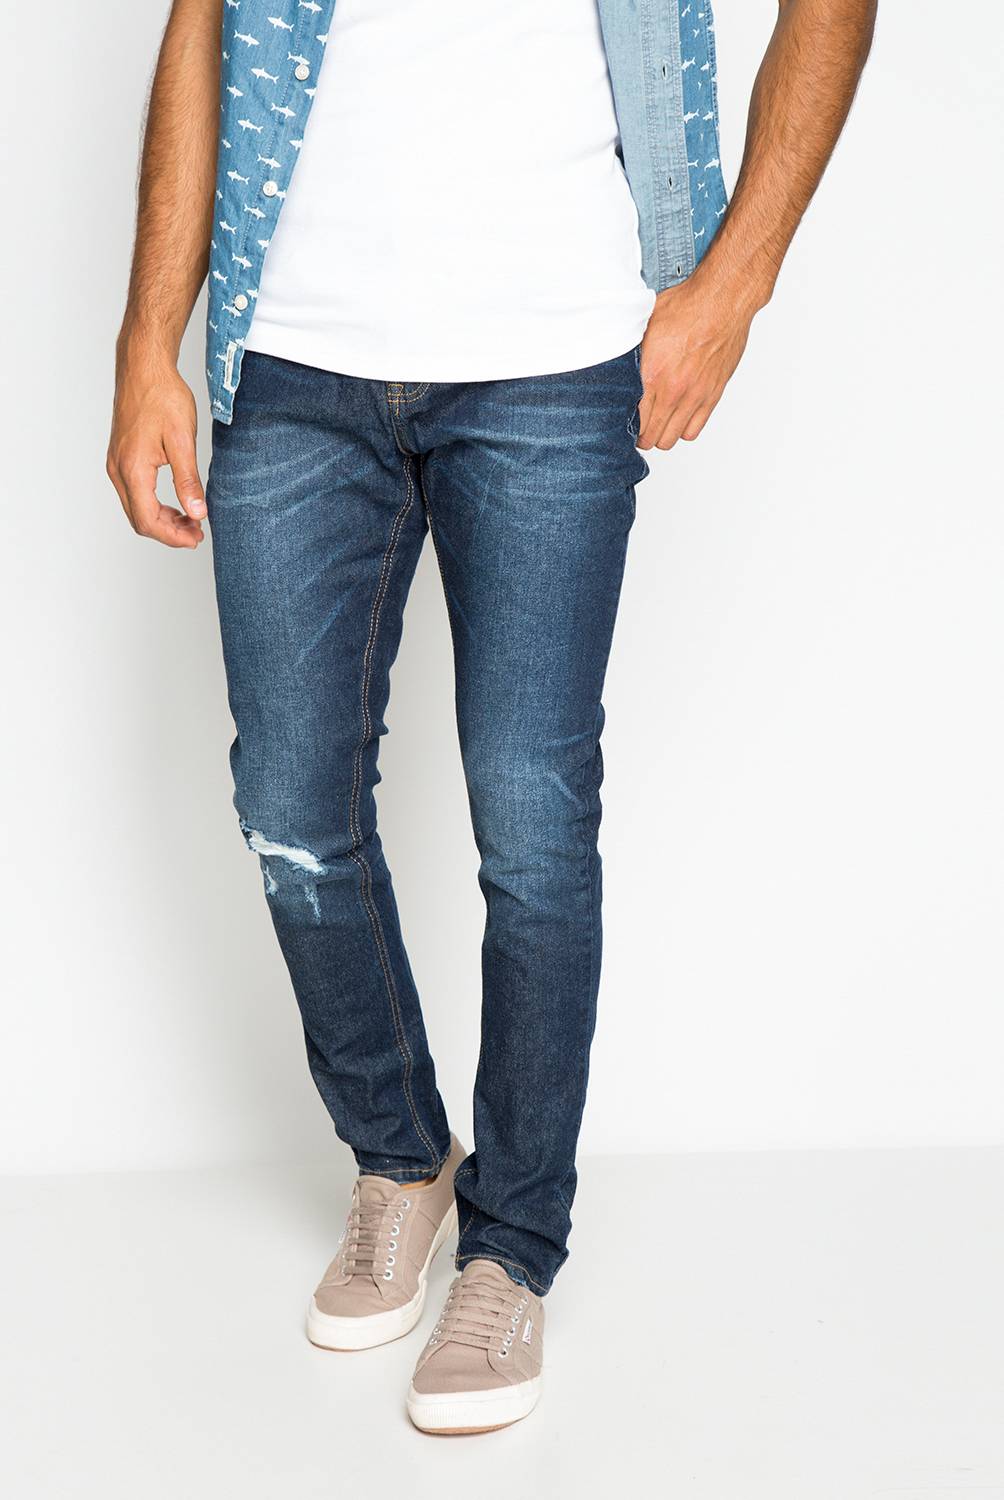 BEARCLIFF - Bearcliff Jeans Slim Fit Hombre